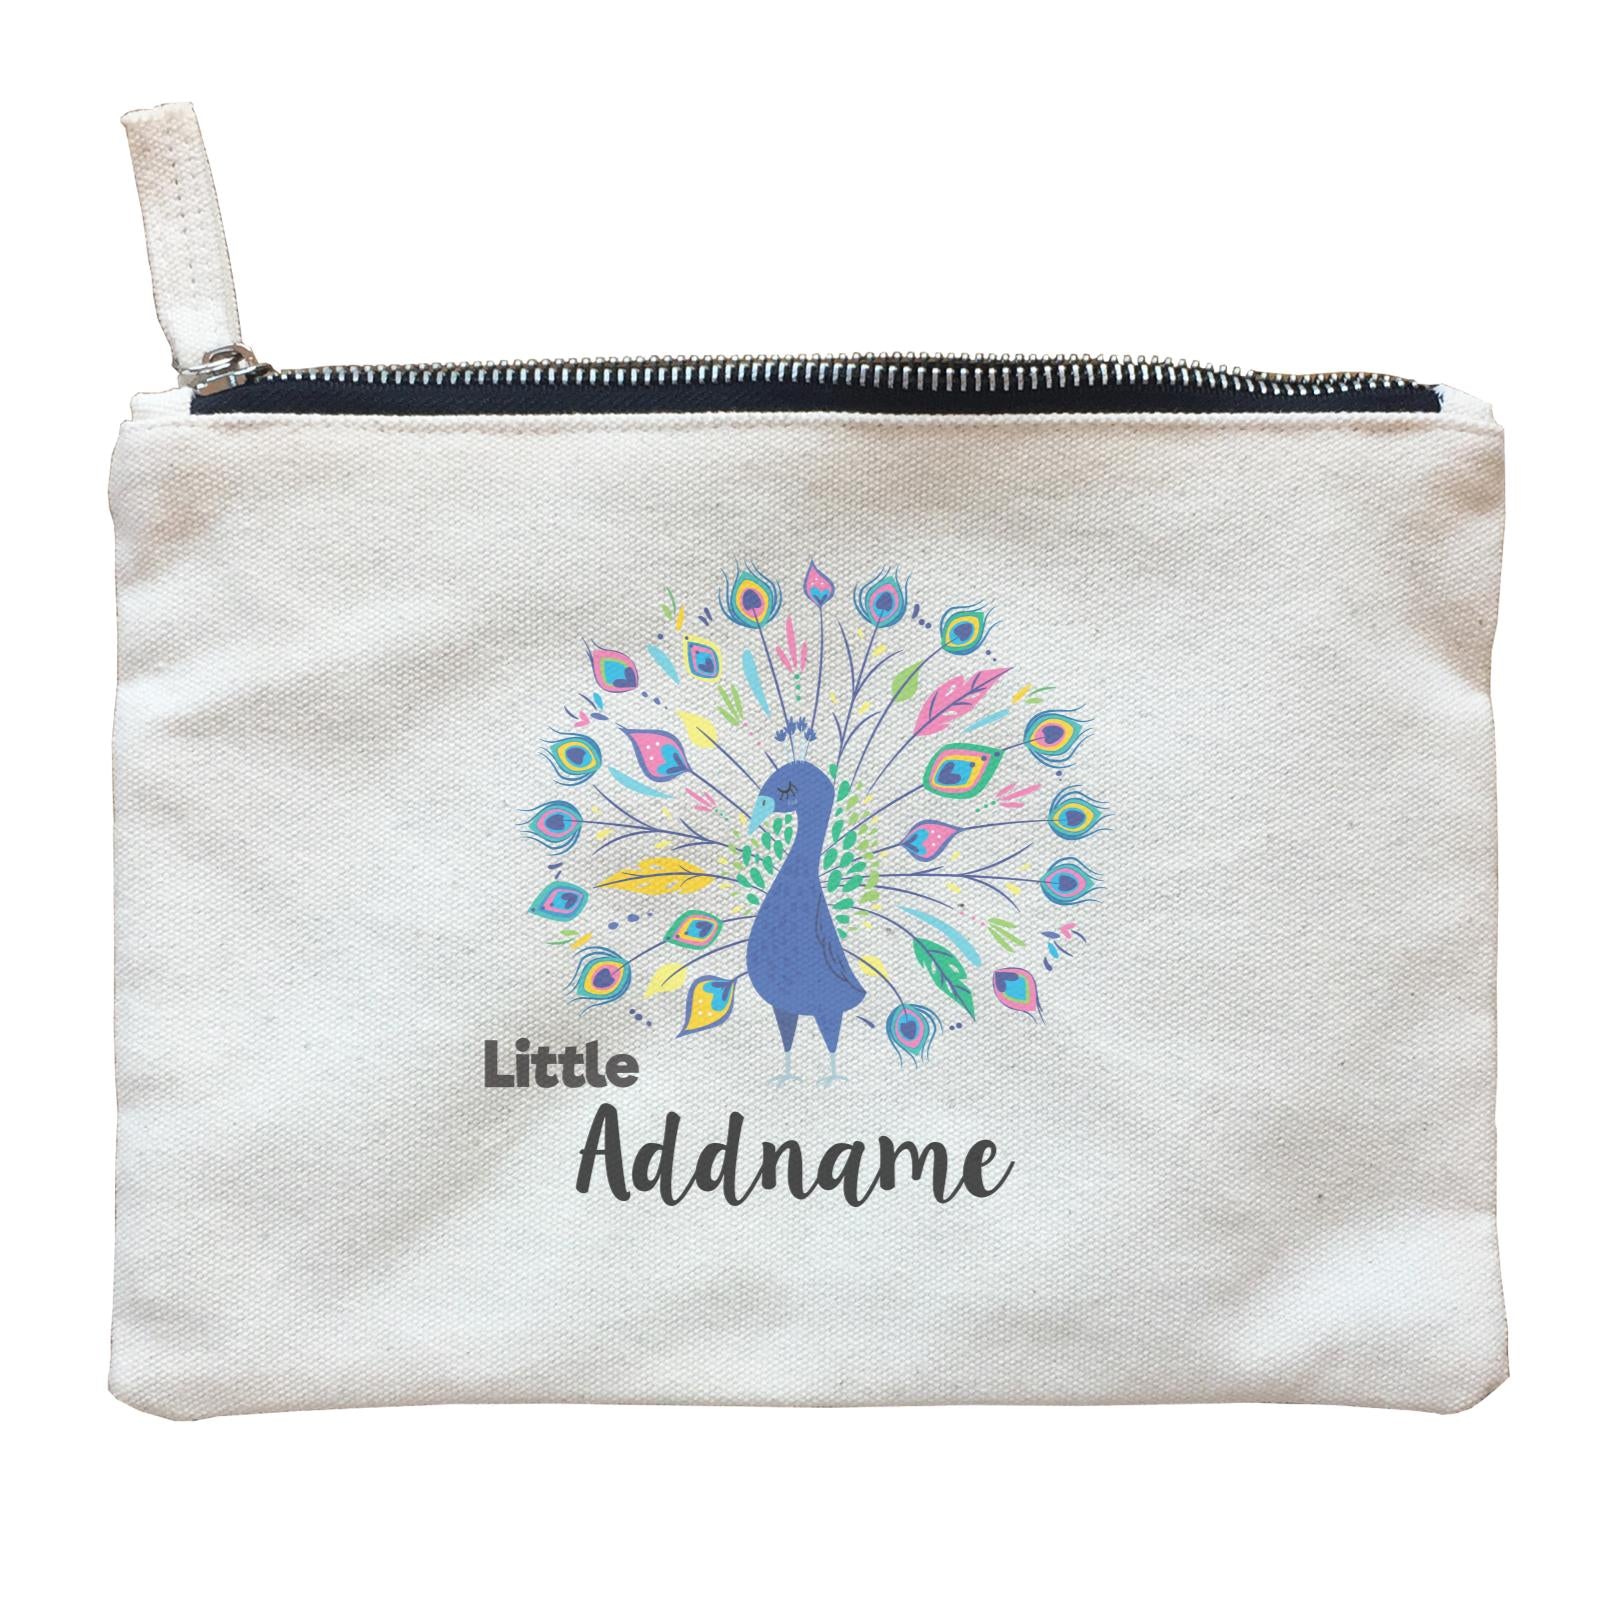 Deepavali Colourful Sweet Little Peacock Addname Zipper Pouch